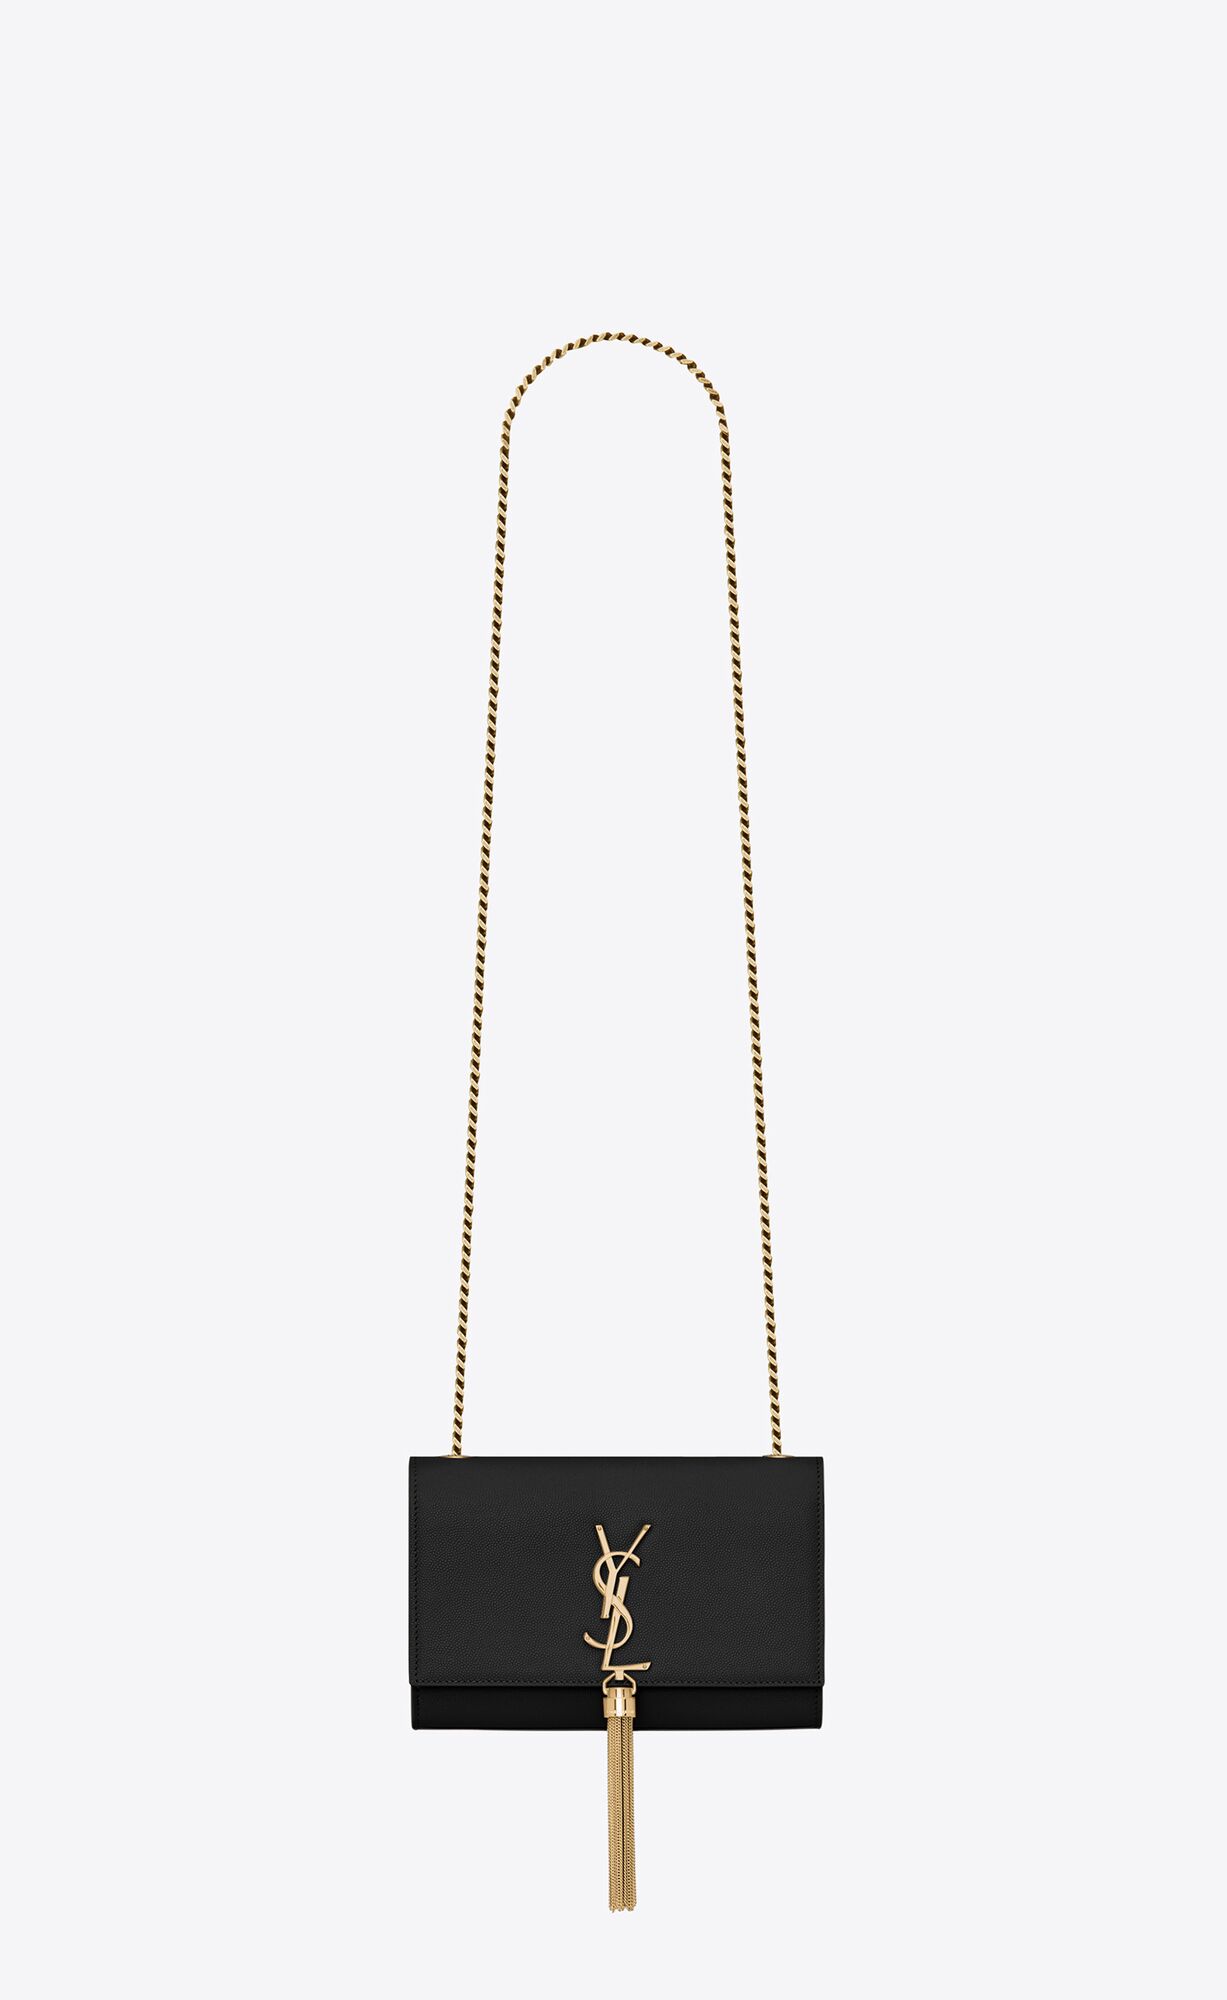 Saint Laurent Kate Small Chain Bag With Tassel In Grain De Poudre Embossed Leather – Black – 474366BOW0J1000